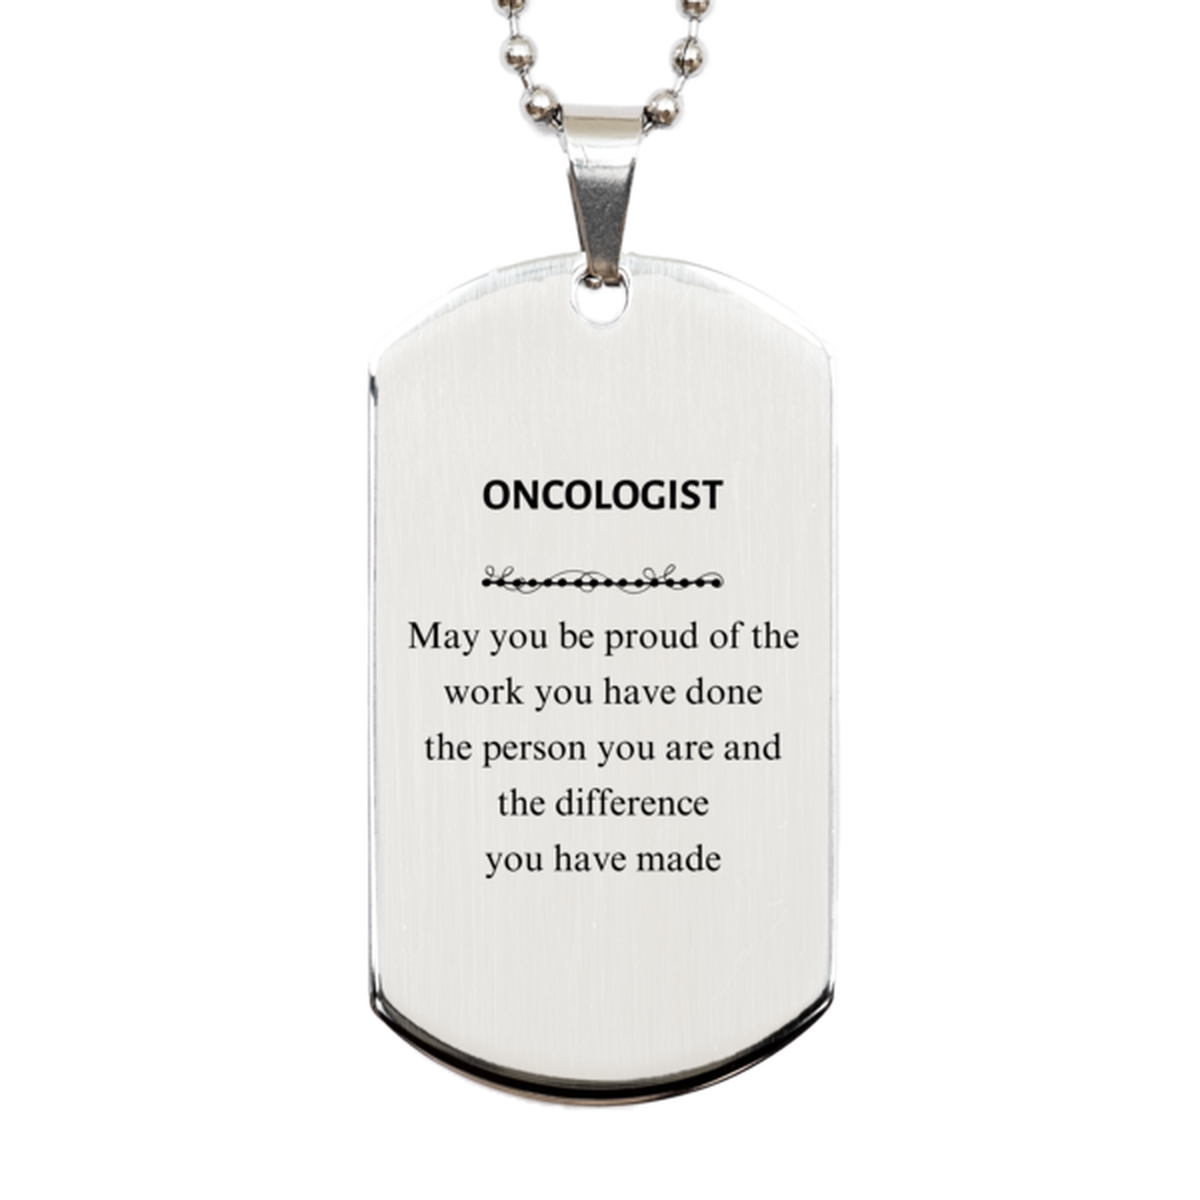 Oncologist May you be proud of the work you have done, Retirement Oncologist Silver Dog Tag for Colleague Appreciation Gifts Amazing for Oncologist